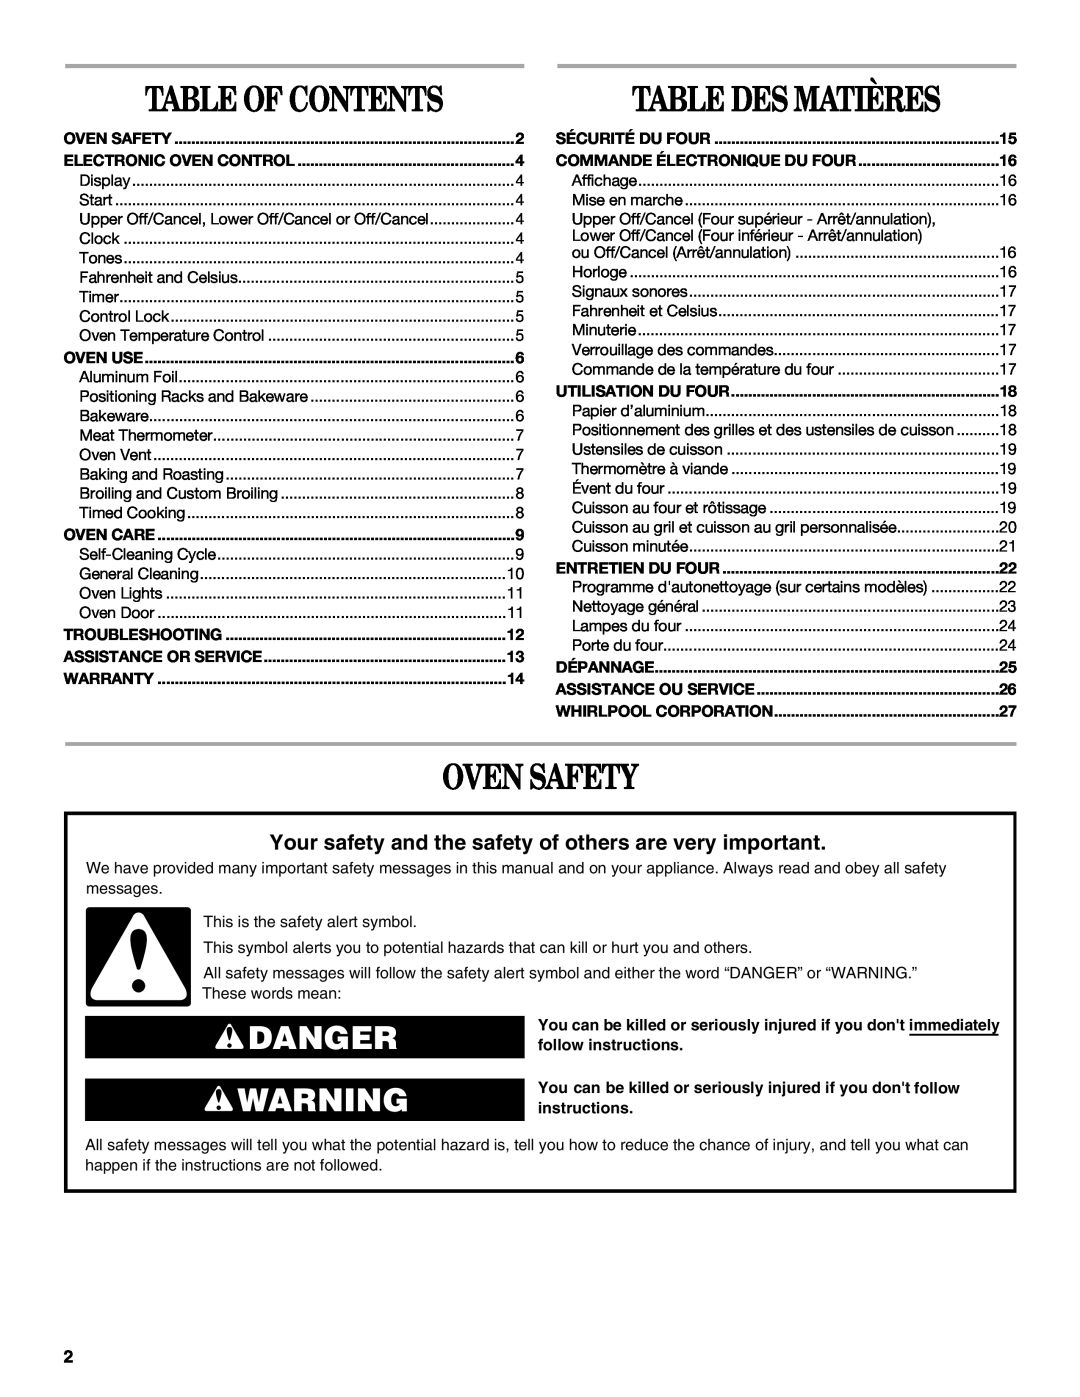 Whirlpool RBS275PV manual Oven Safety, Danger, Table Of Contents, Table Des Matières 